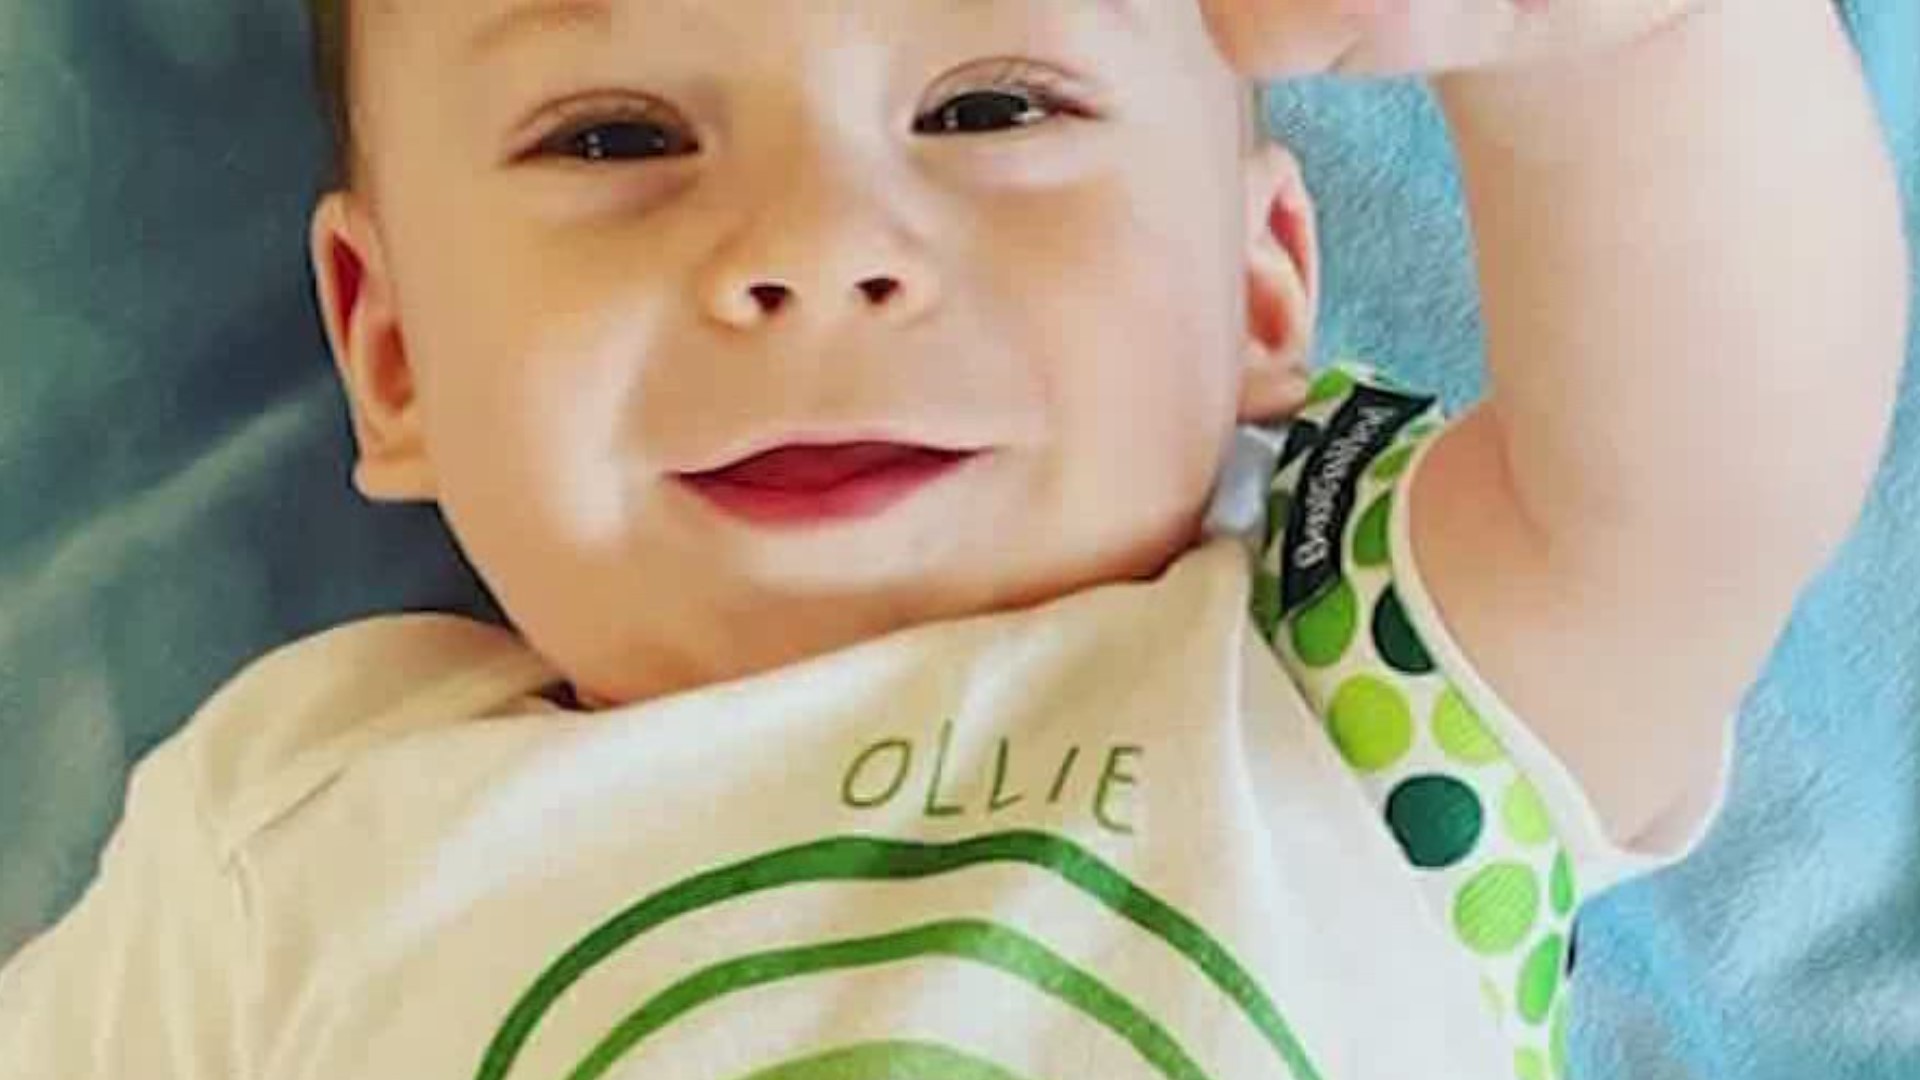 A baby boy from The Woodlands is about to get his life-saving miracle thanks to hundreds of strangers.